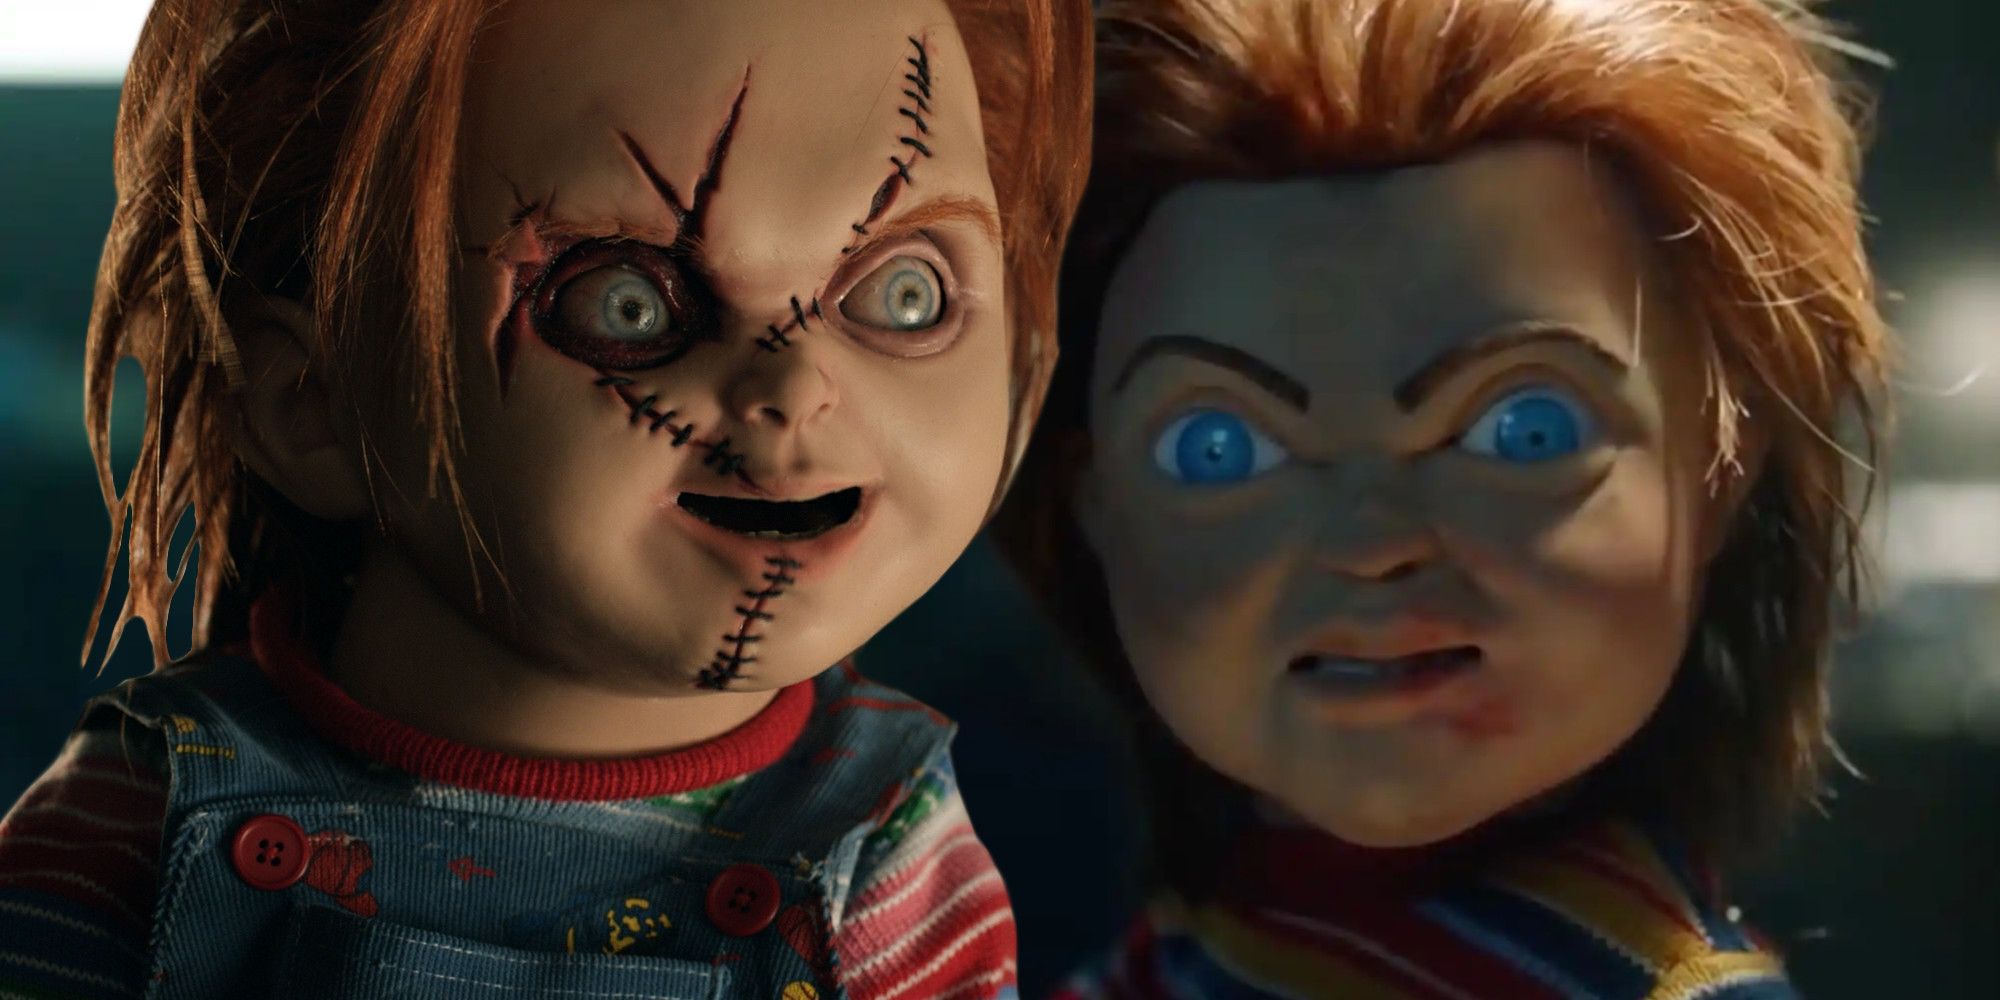 Brad Dourif as Chucky in Bride of Chucky and Mark Hamill as Chucky in 2019 Childs Play Remake